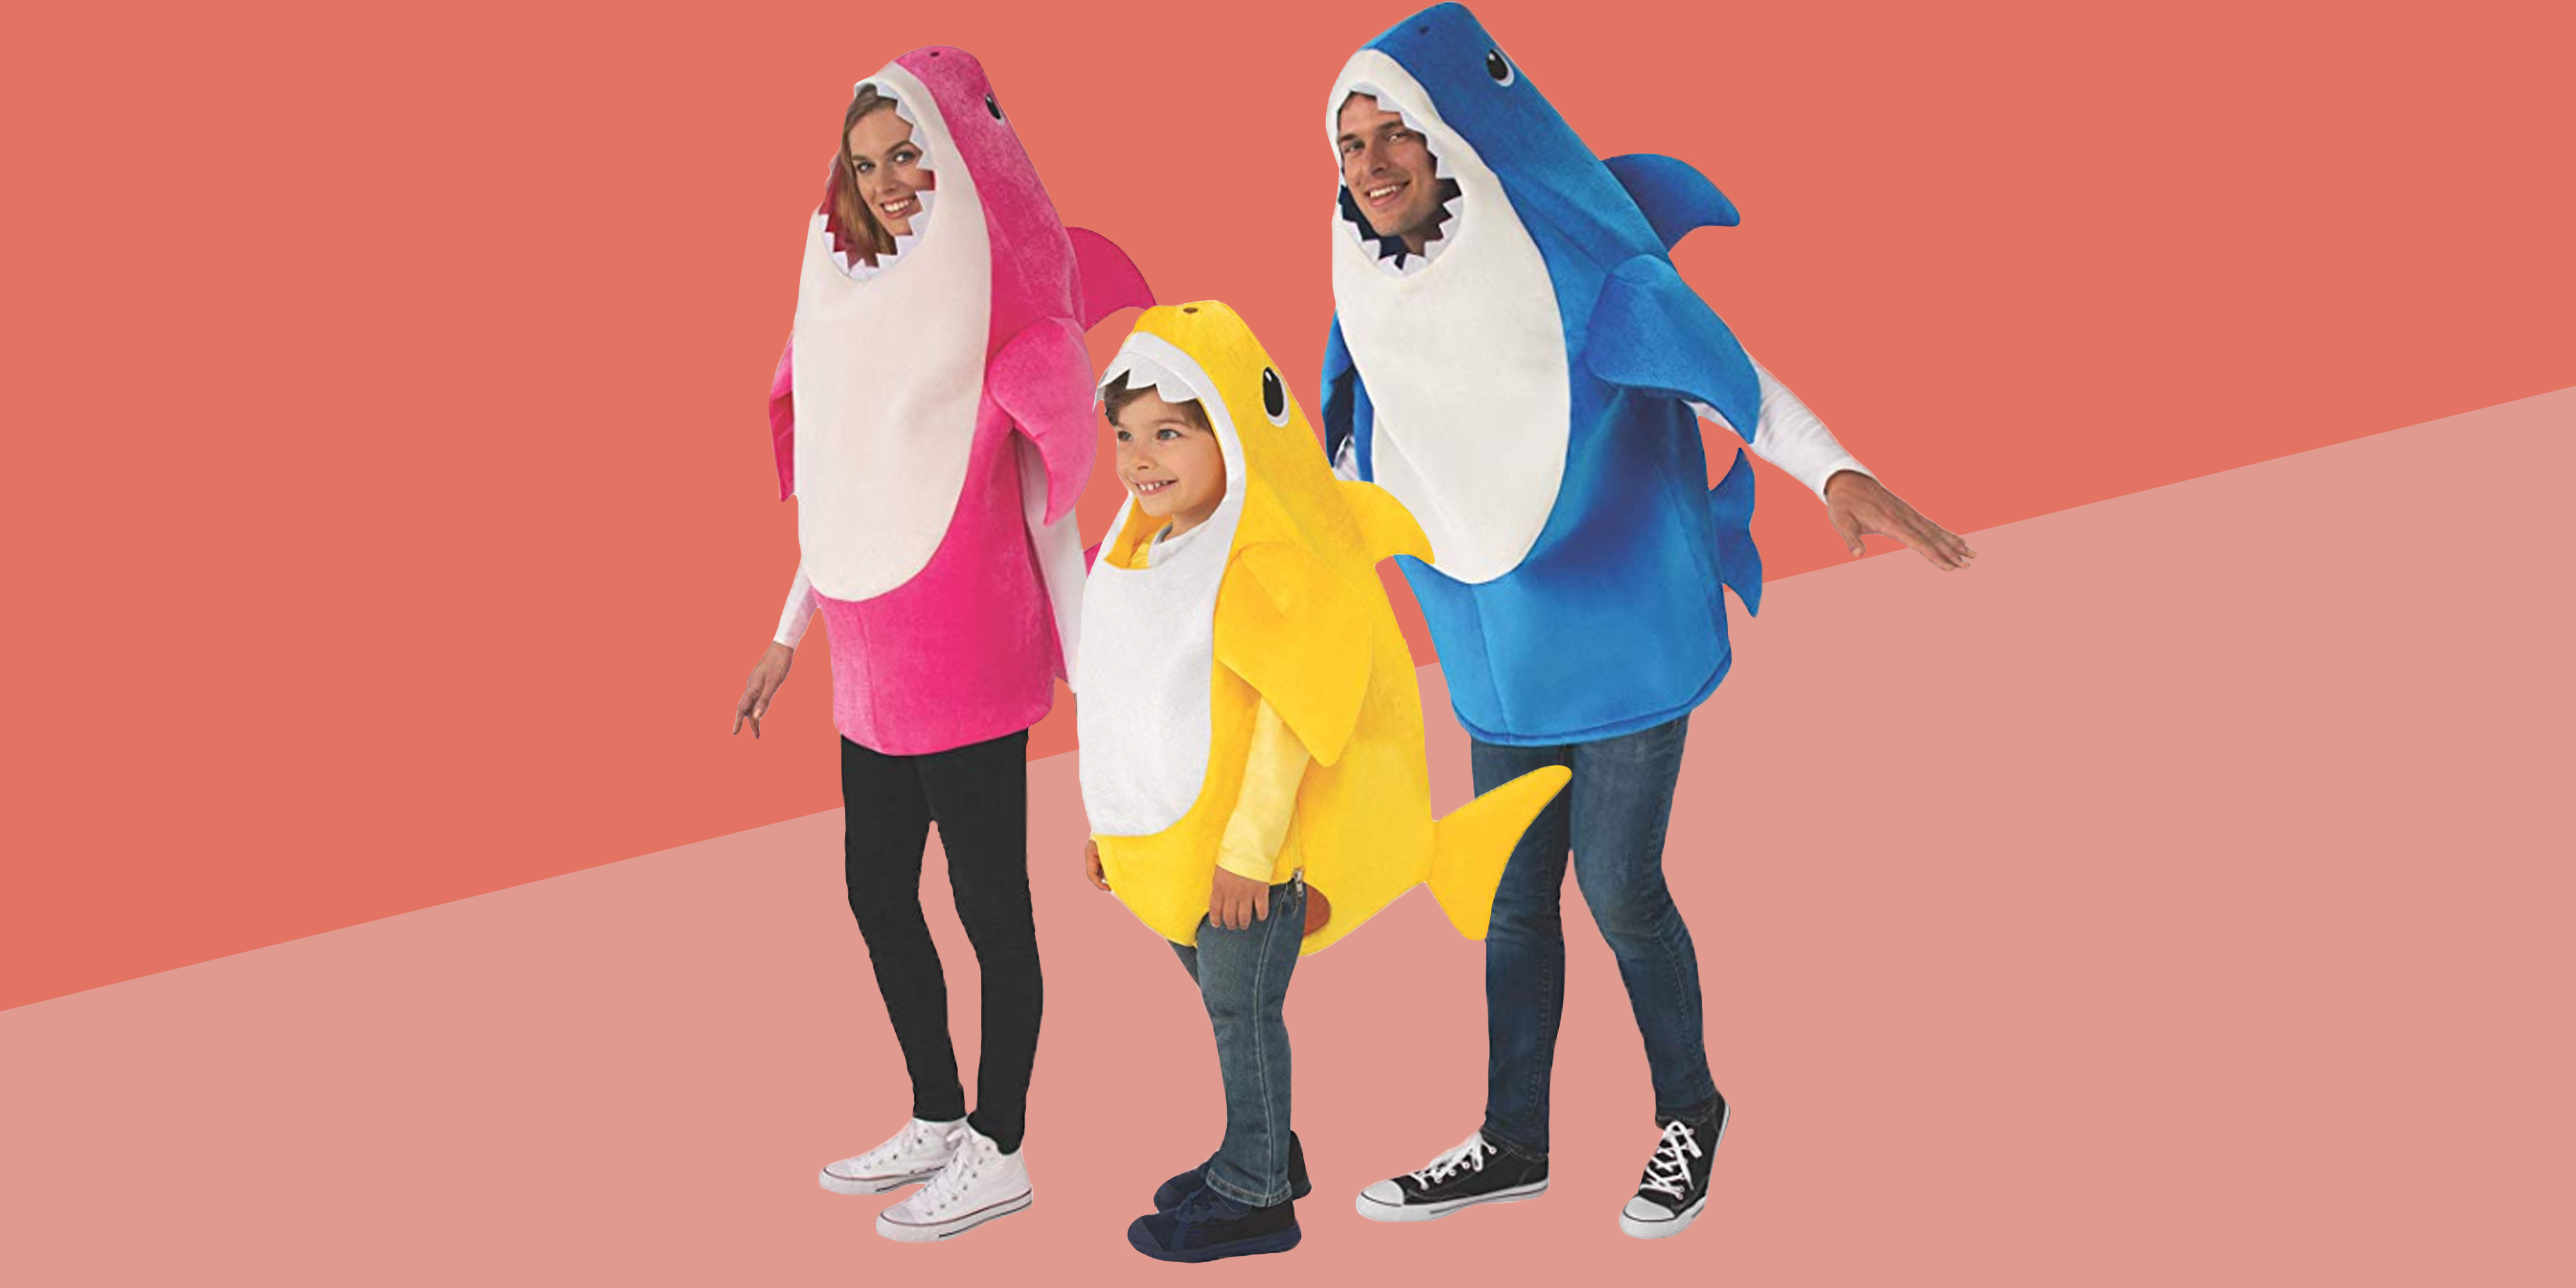 baby shark dog outfit